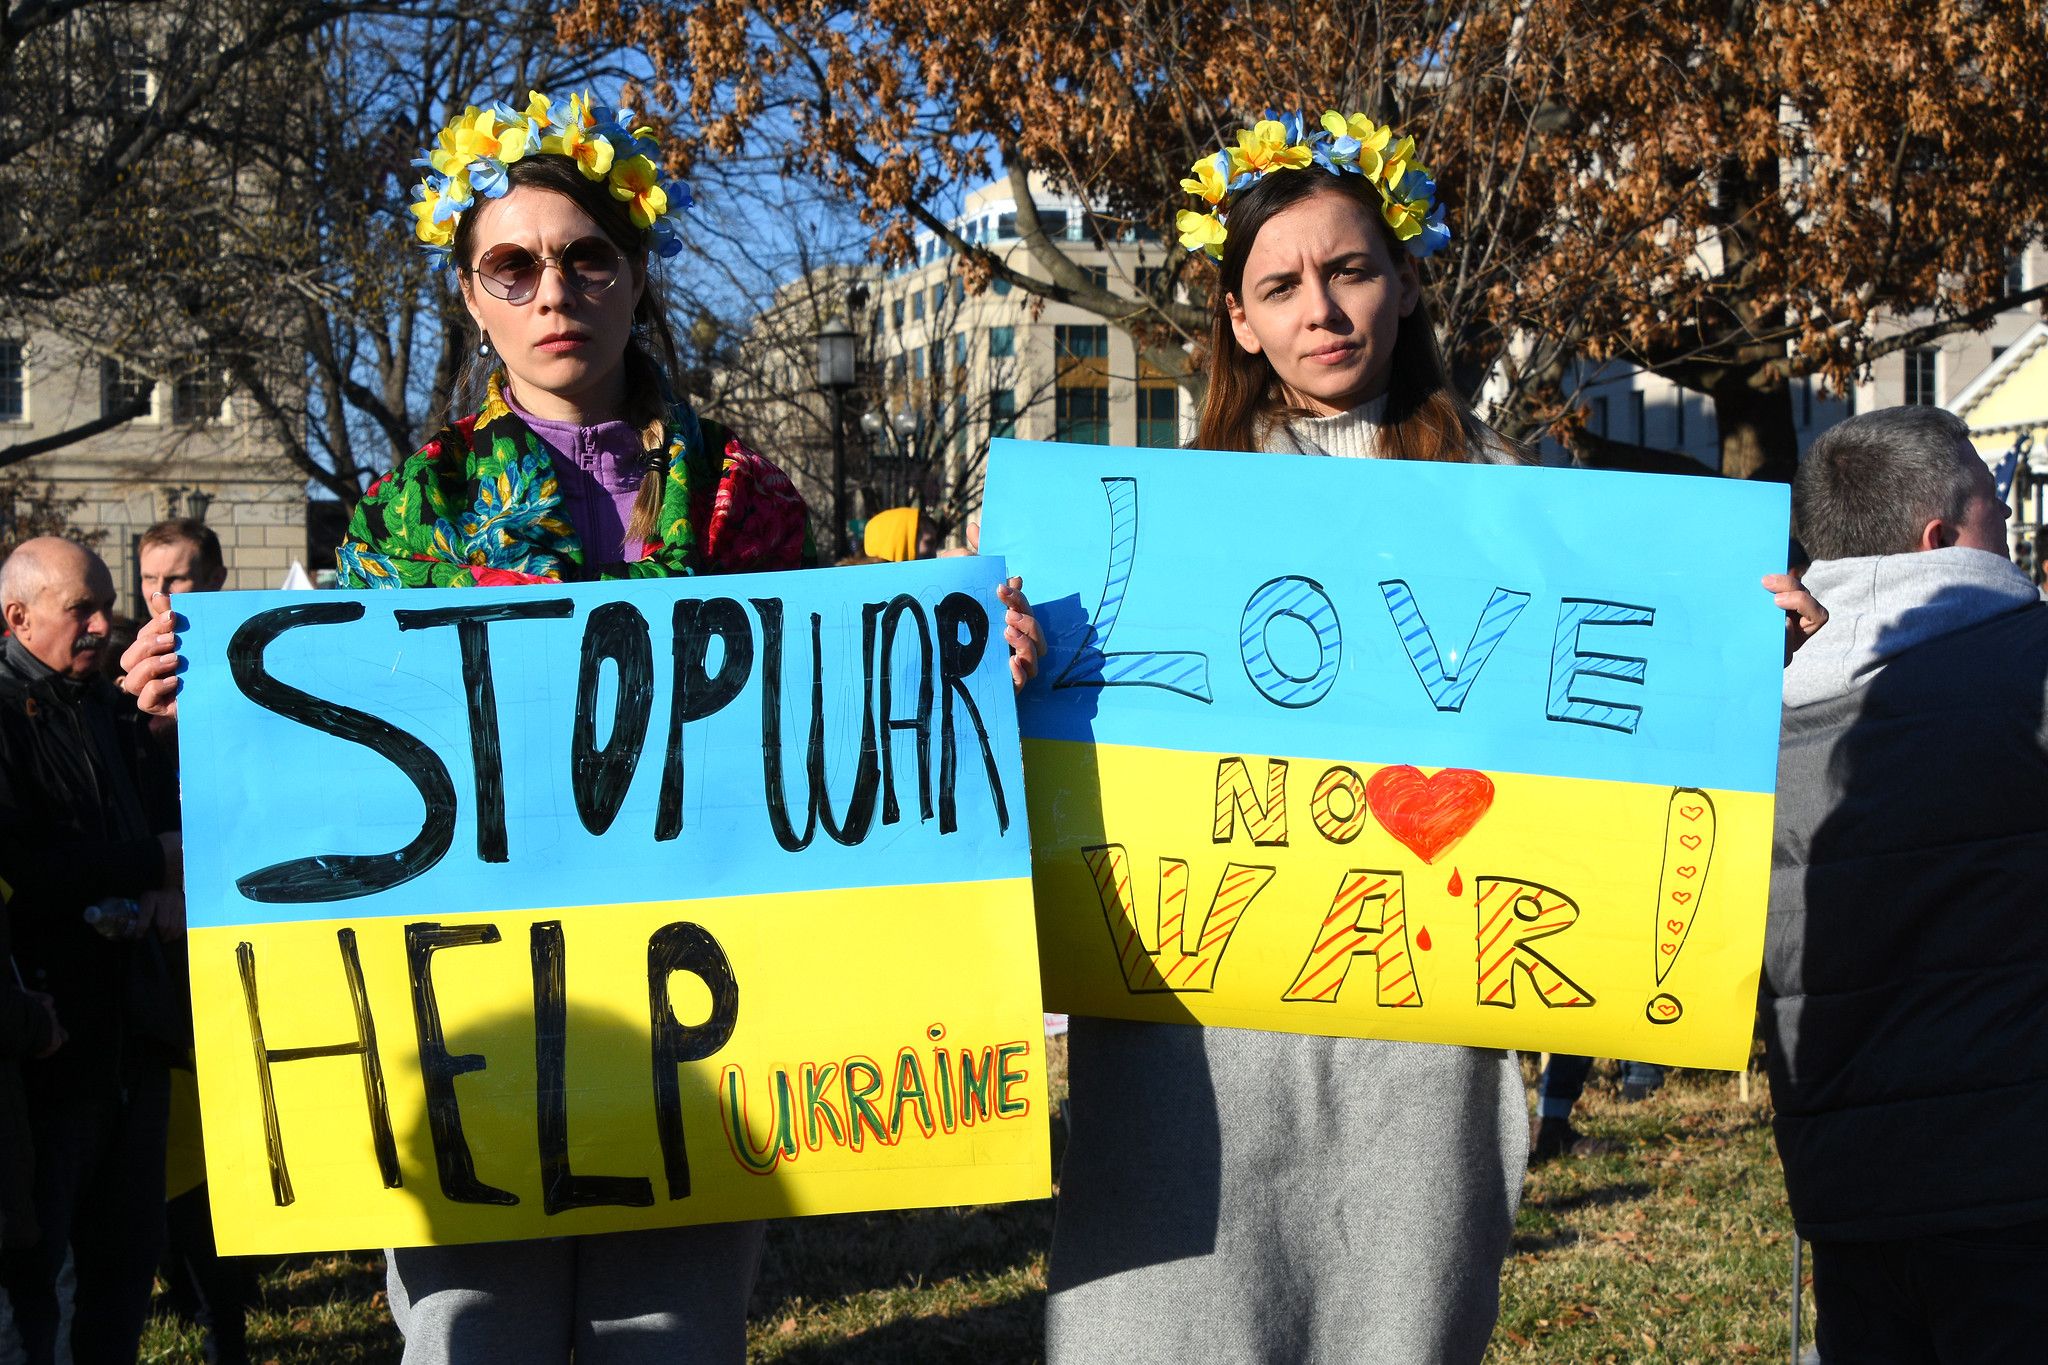 Two individuals protesting the war in Ukraine. Photo by Amaury Laporte from Creative commons/WikiMedia.